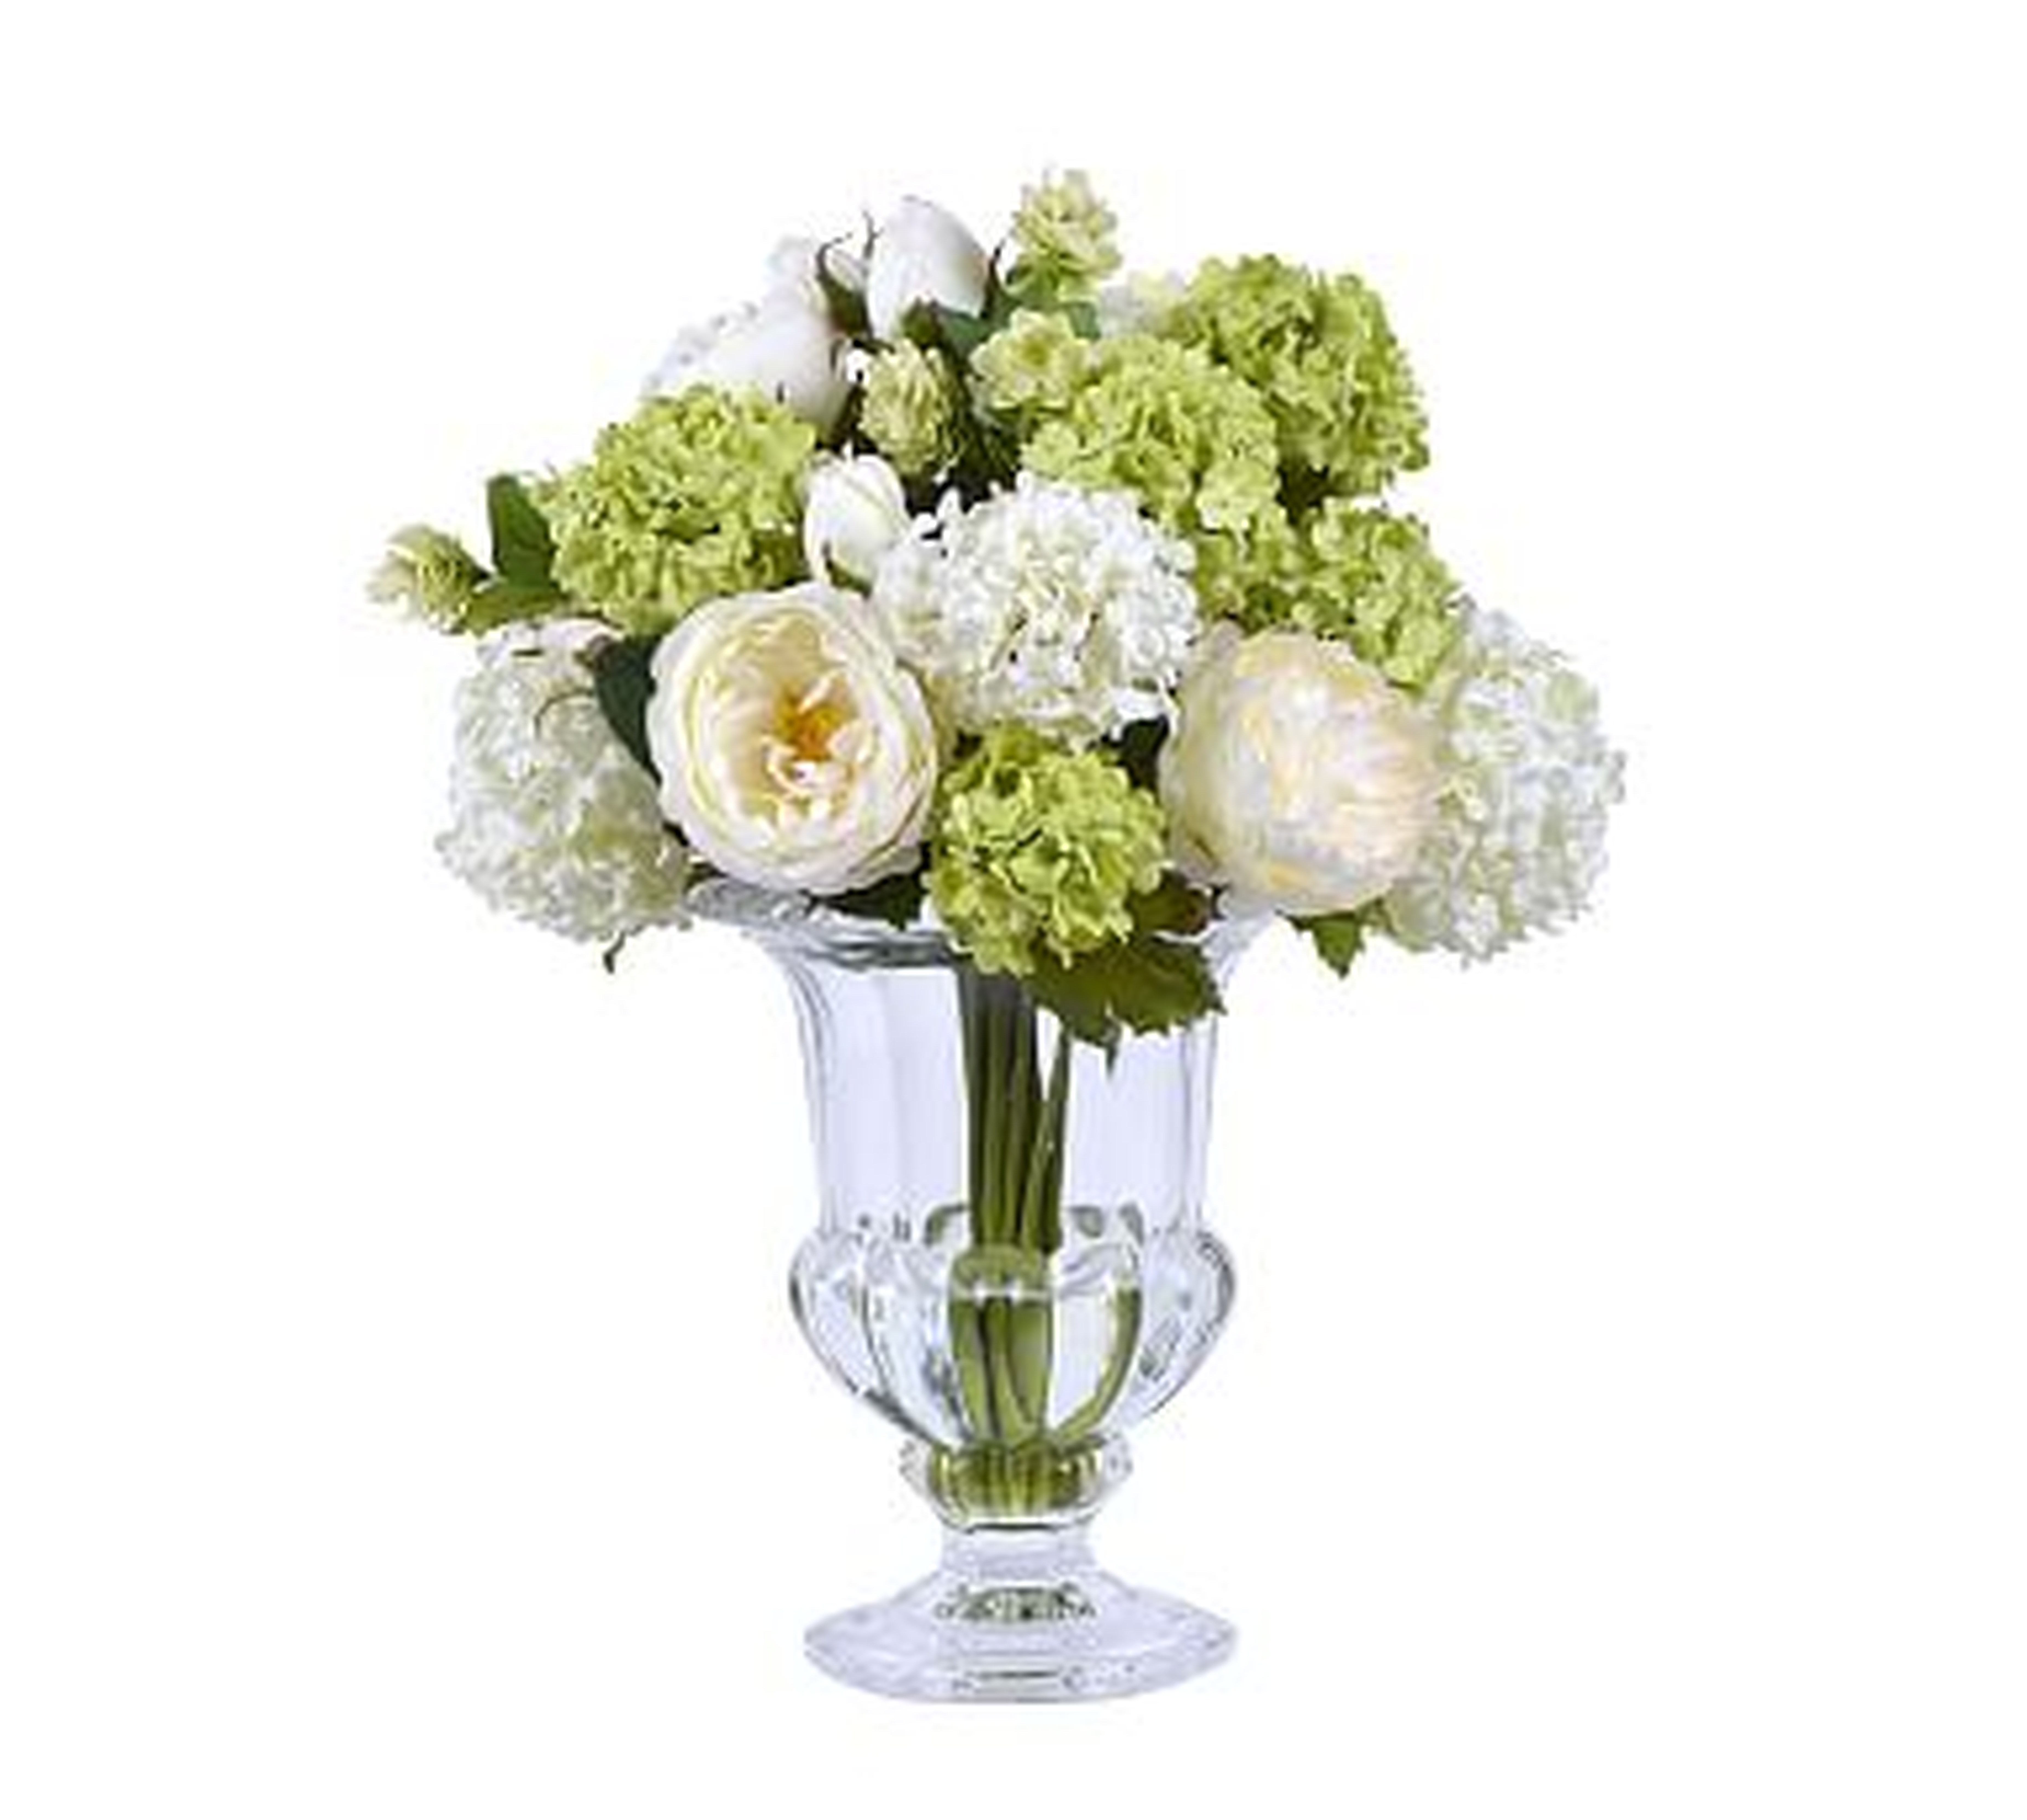 Faux Rose Hips In Glass Vase - White/Green, 16" - Pottery Barn